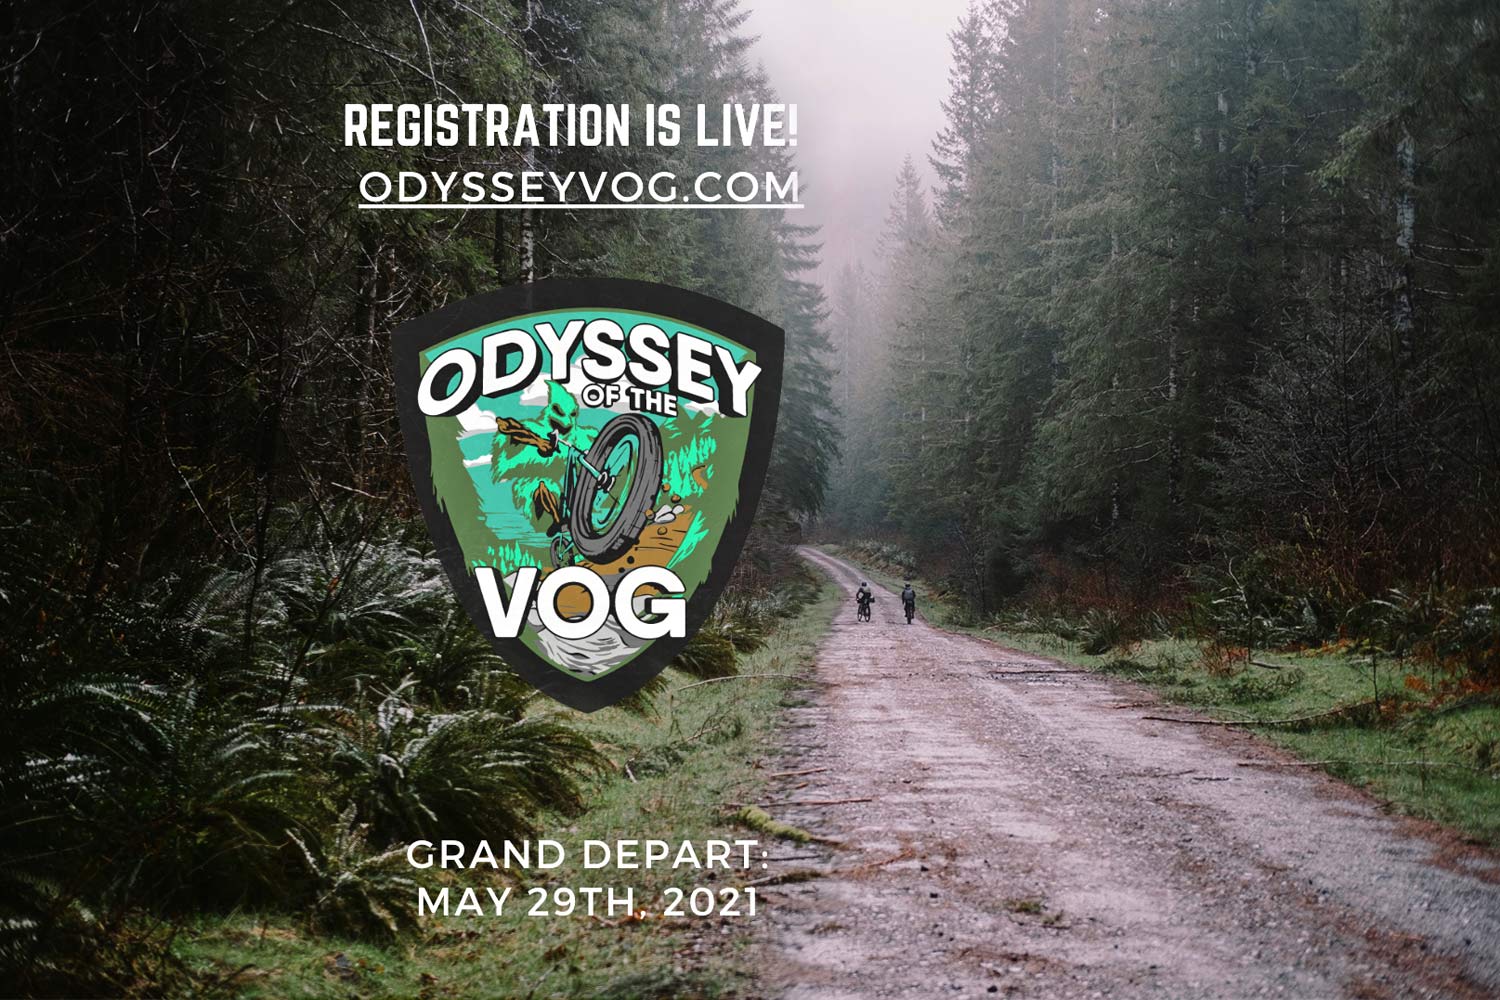 The Odyssey of the VOG gravel bikepacking race, May 29 2021